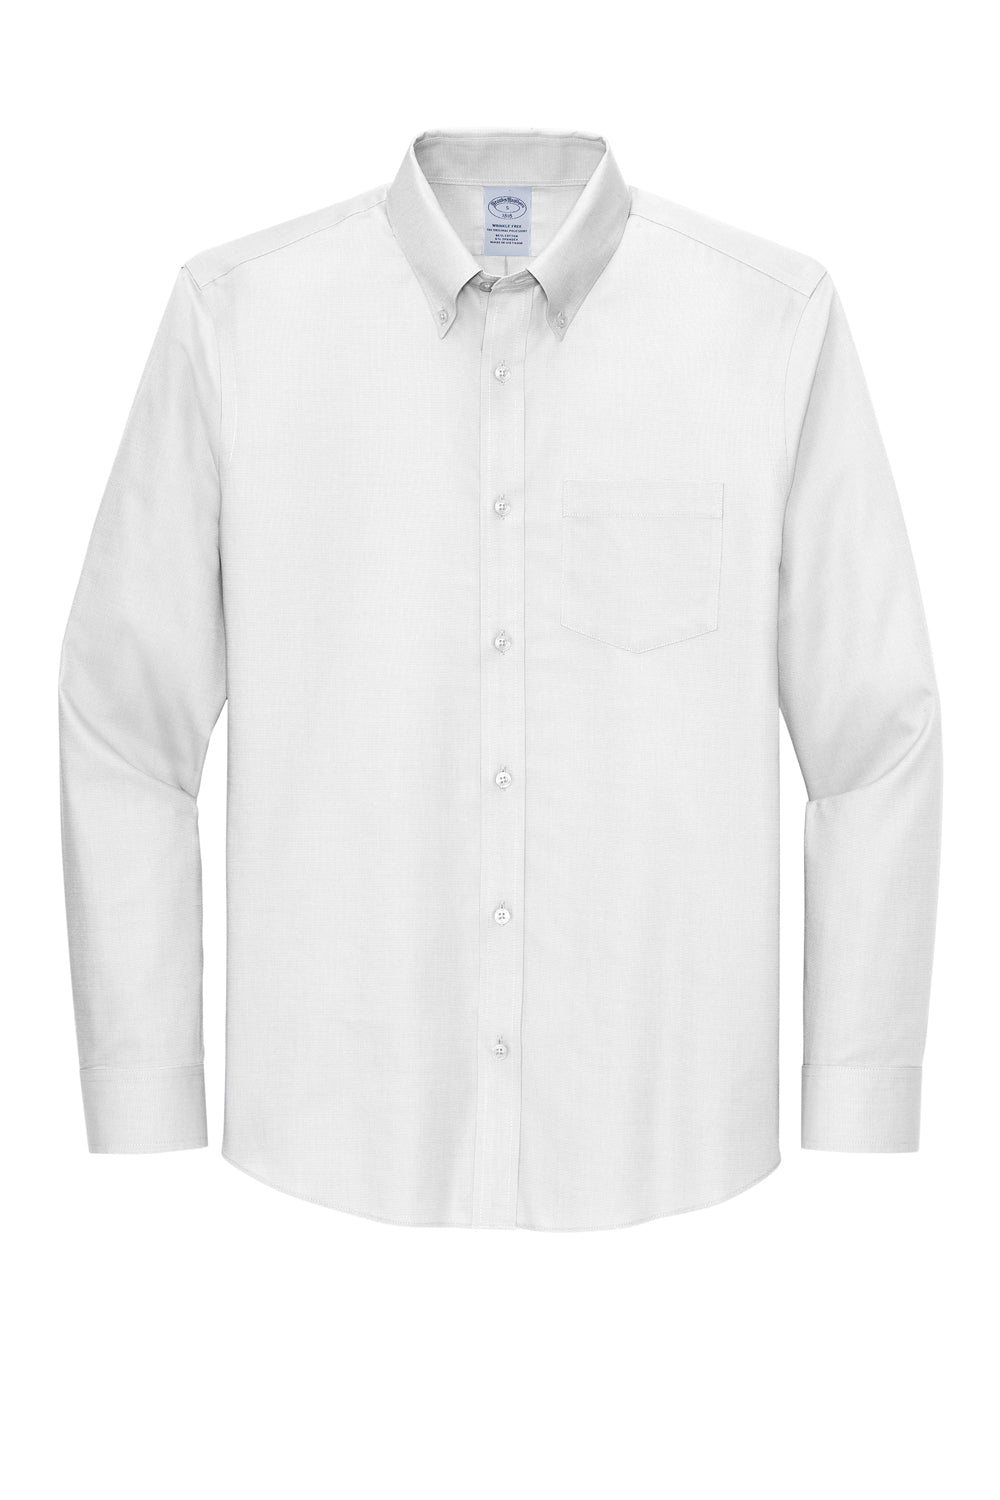 Brooks Brothers Mens Wrinkle Resistant Nailhead Long Sleeve Button Down Shirt w/ Pocket White Flat Front